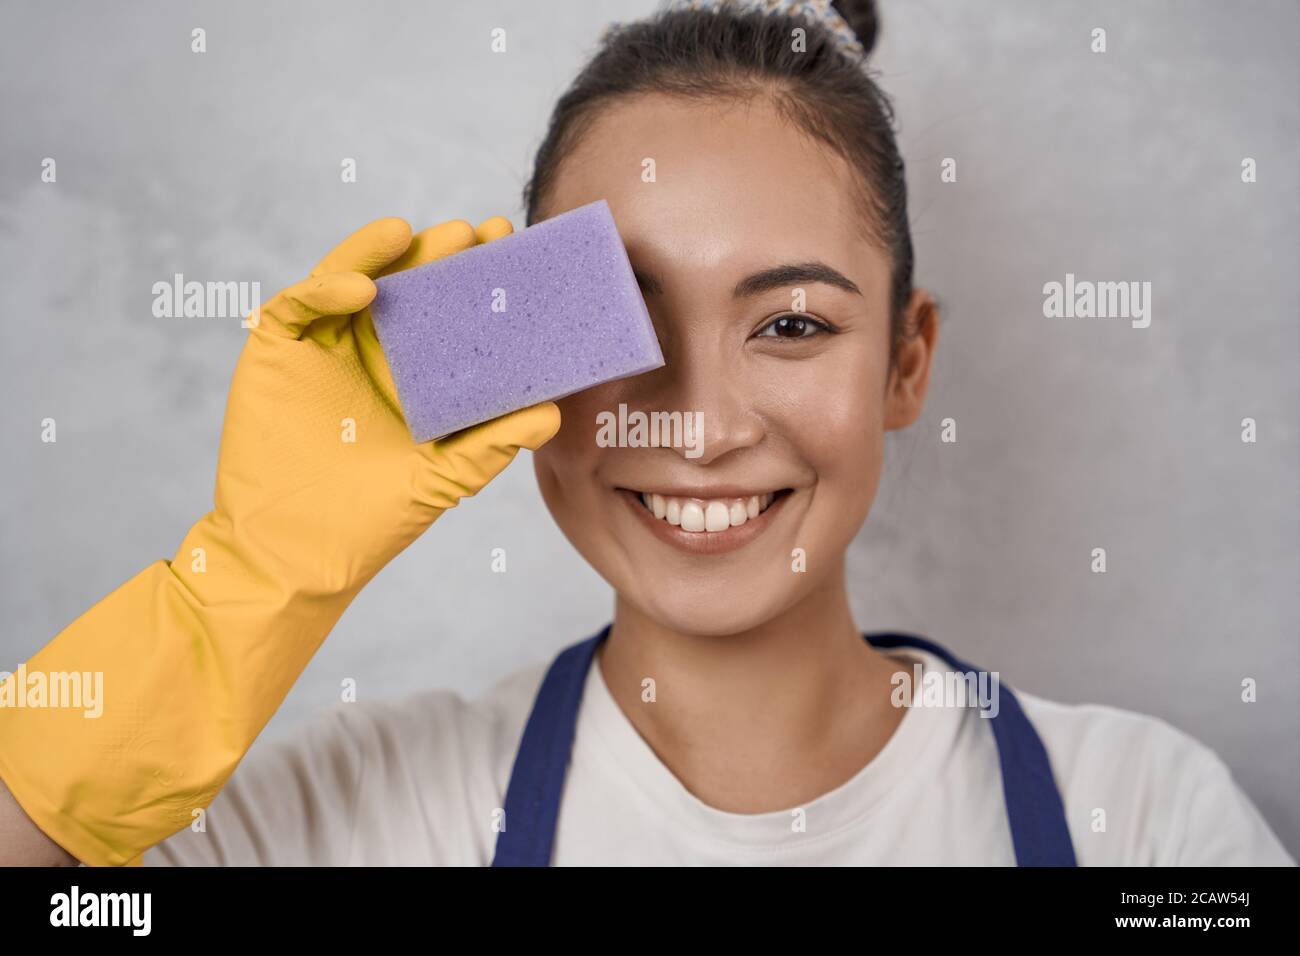 Close up portrait of funny cleaning lady in yellow rubber gloves covering one eye with kitchen sponge, looking at camera and smiling, standing against grey wall. Housekeeping, cleaning services Stock Photo